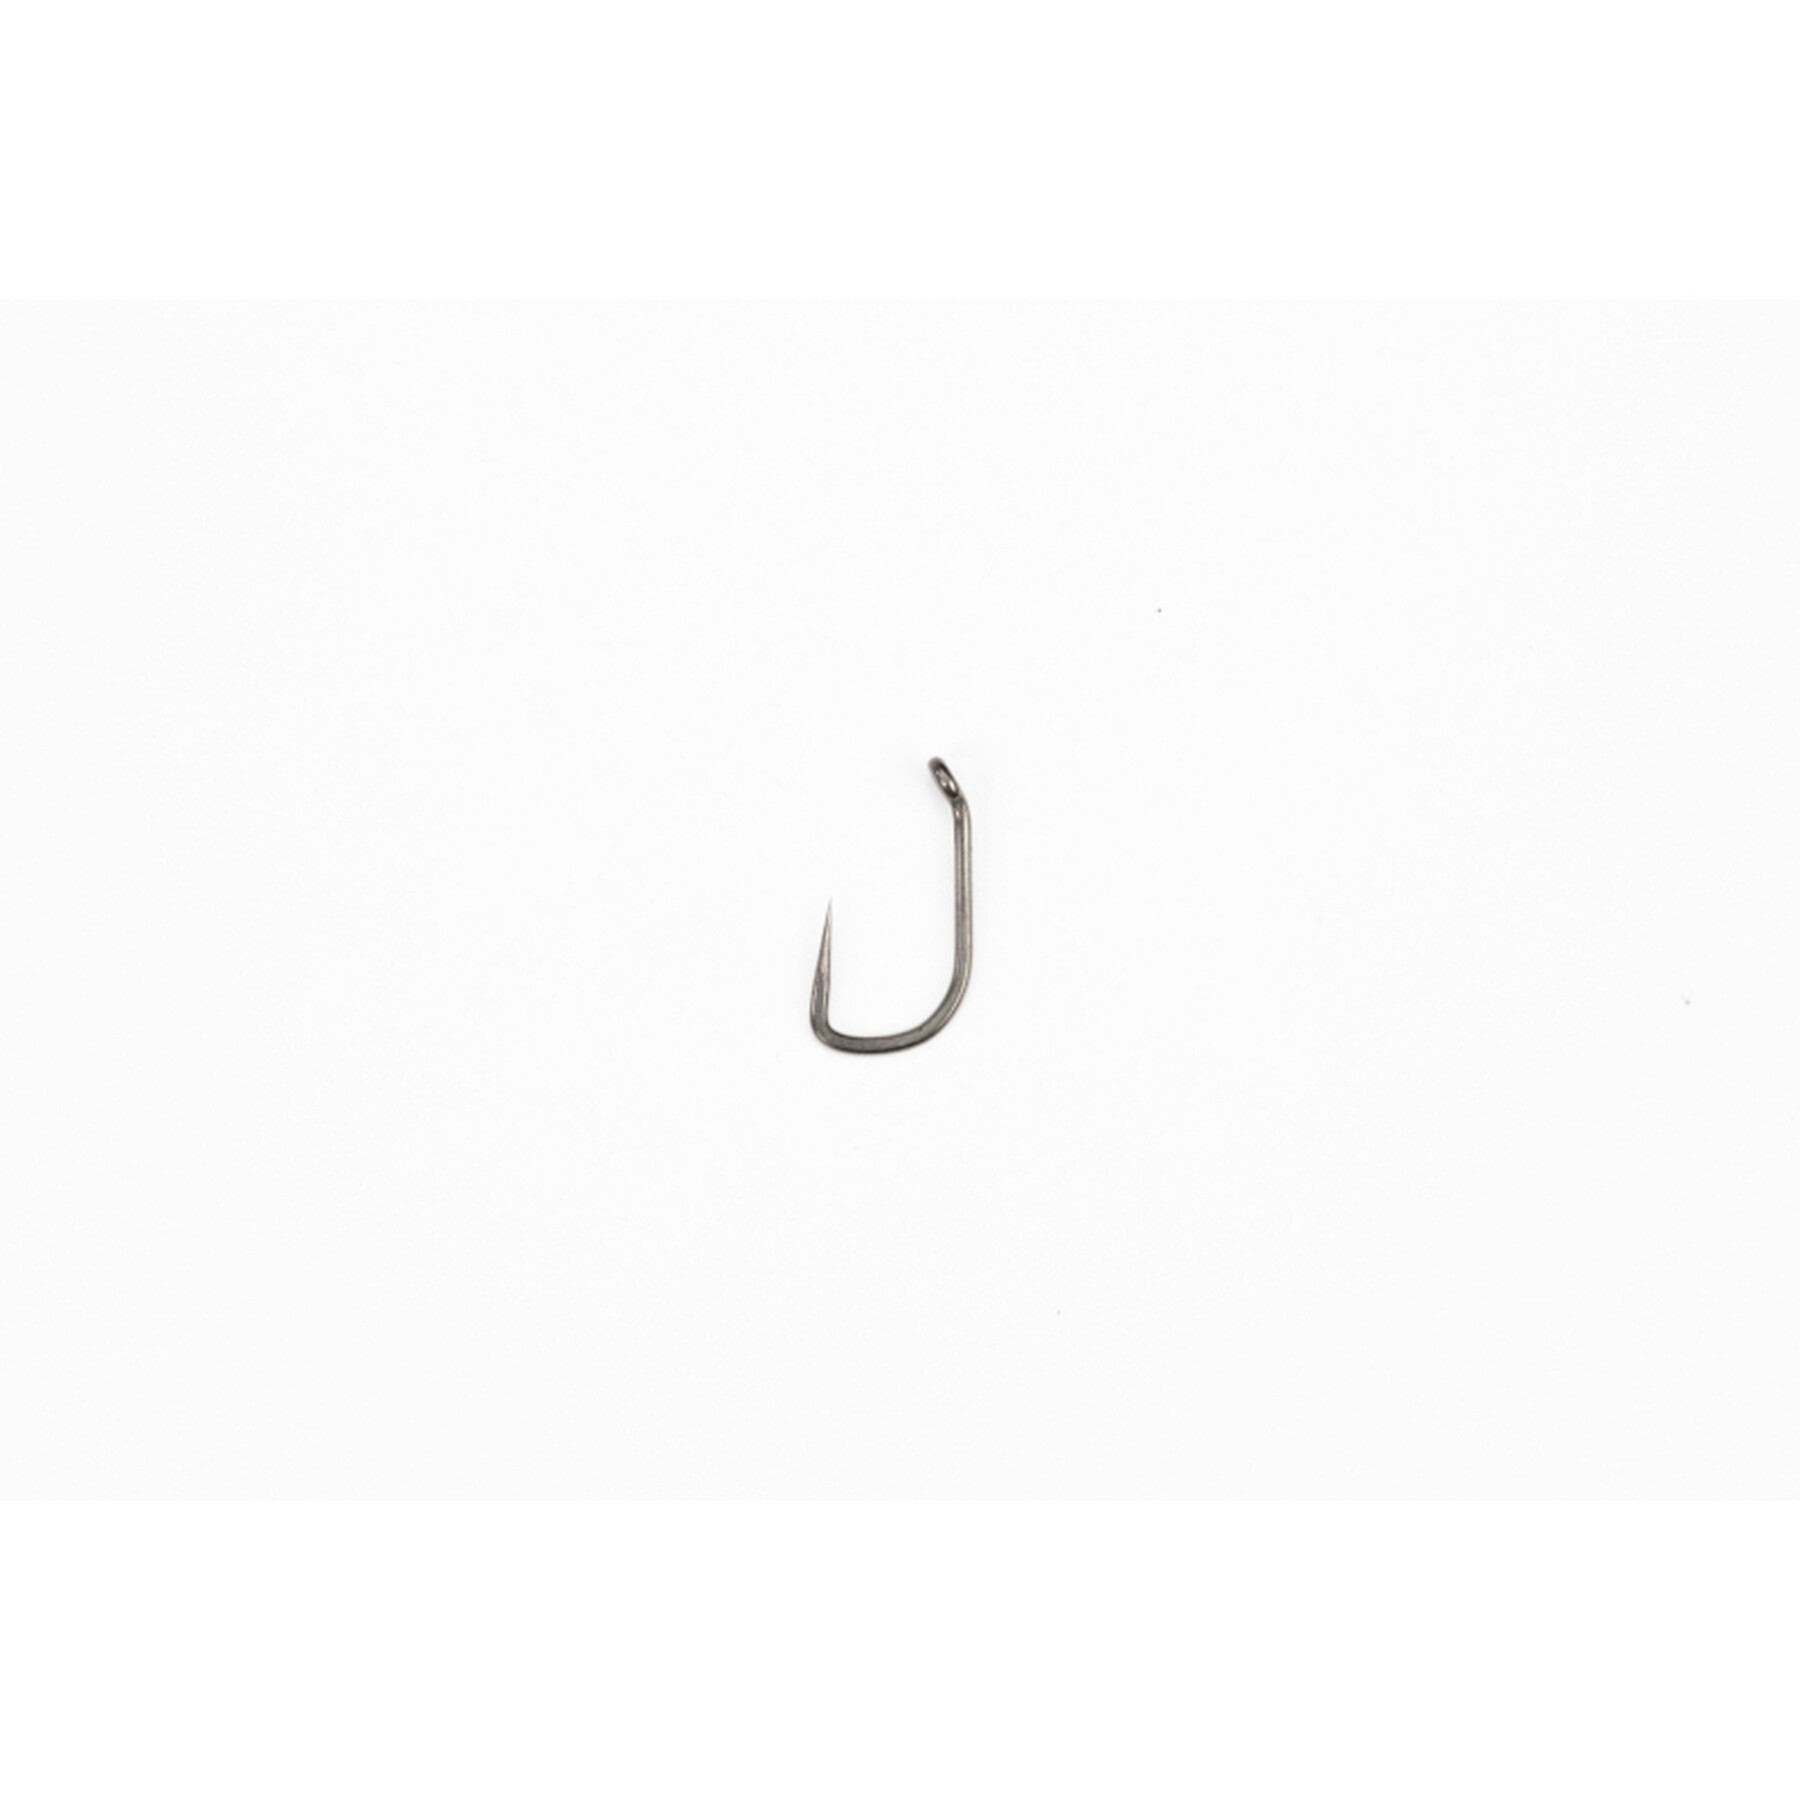 Hook Pinpoint Twister size 2 Micro Barbed